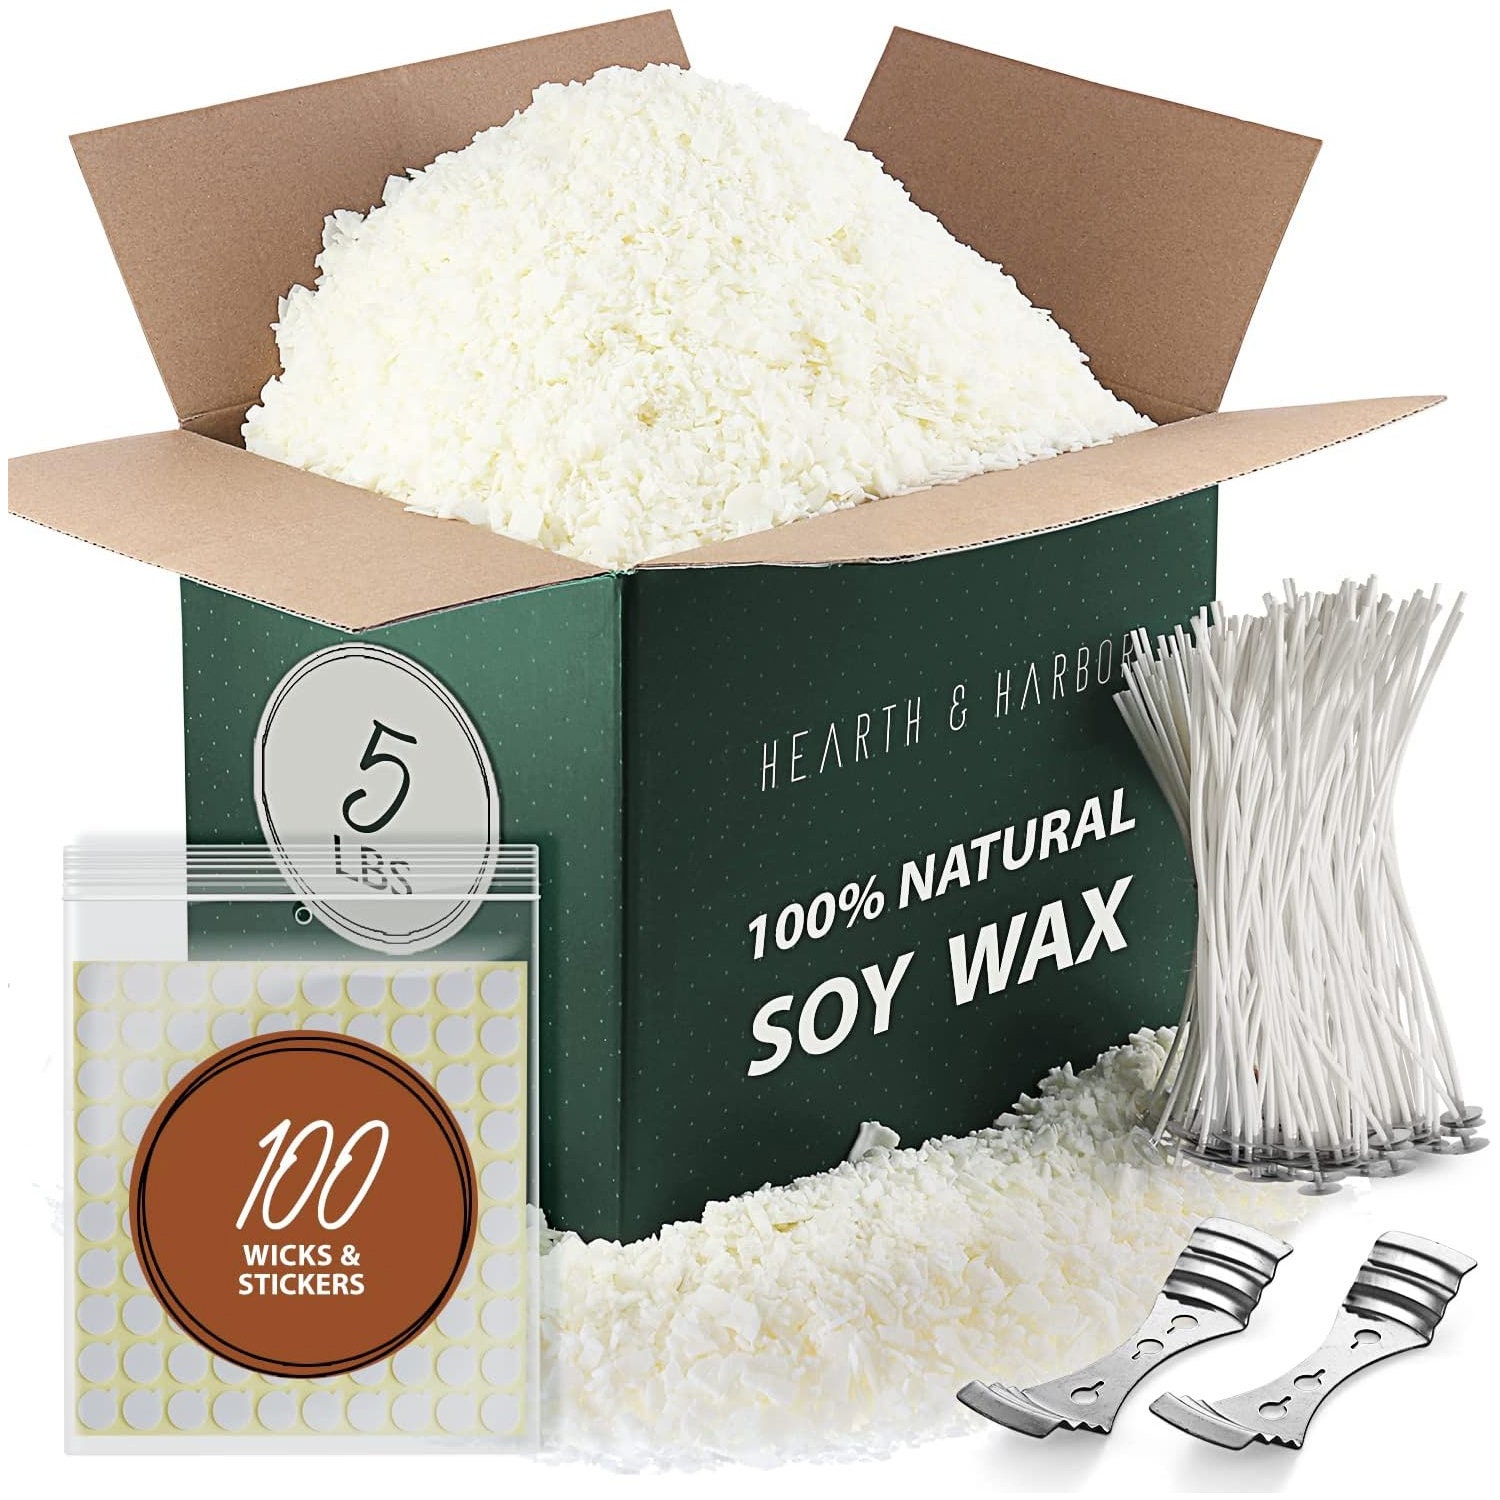 Hearts & Crafts Natural Soy Wax for Candle Making Natural Soy Wax